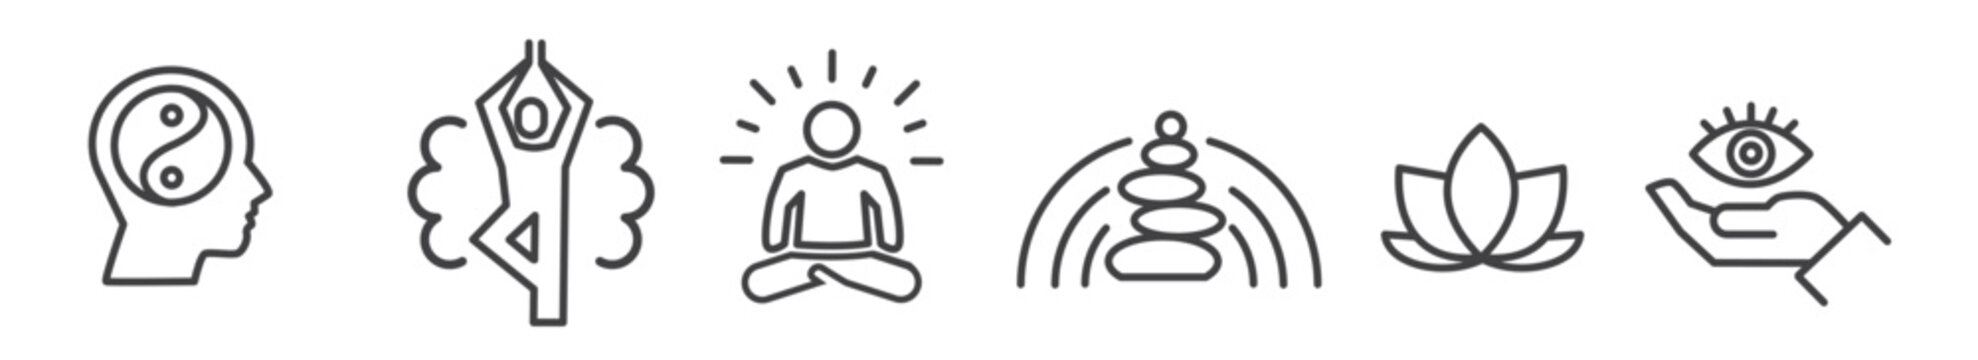 Meditation Practice, Mindfulness and Yoga icons set - thin line icon collection on white background - vector illustration